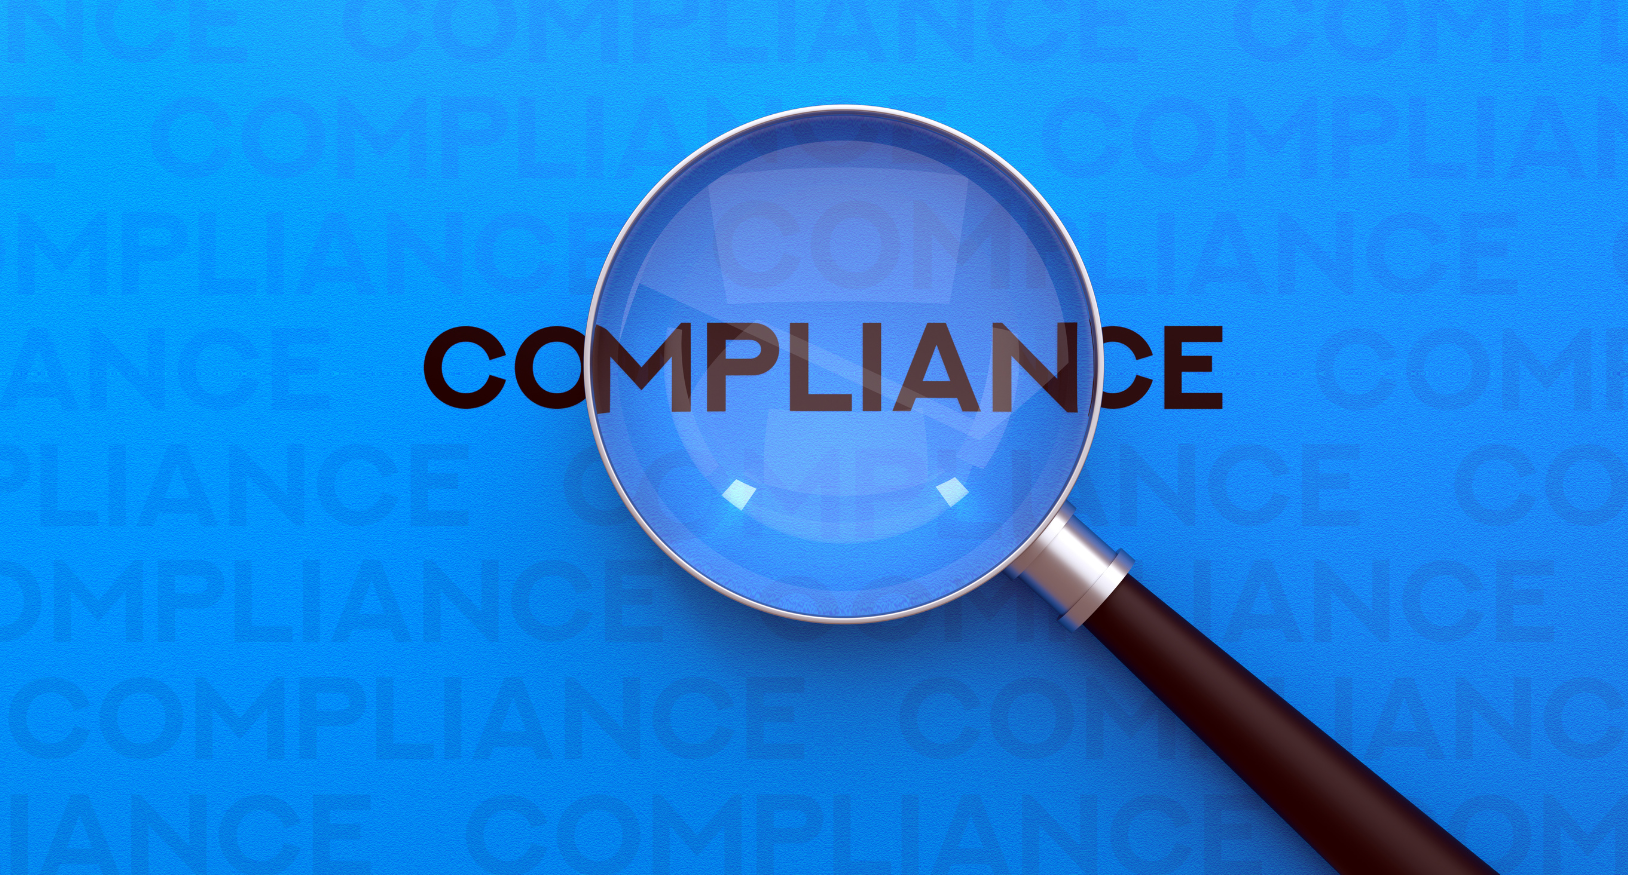 483.85 Conditions of Participation: Compliance and Ethics